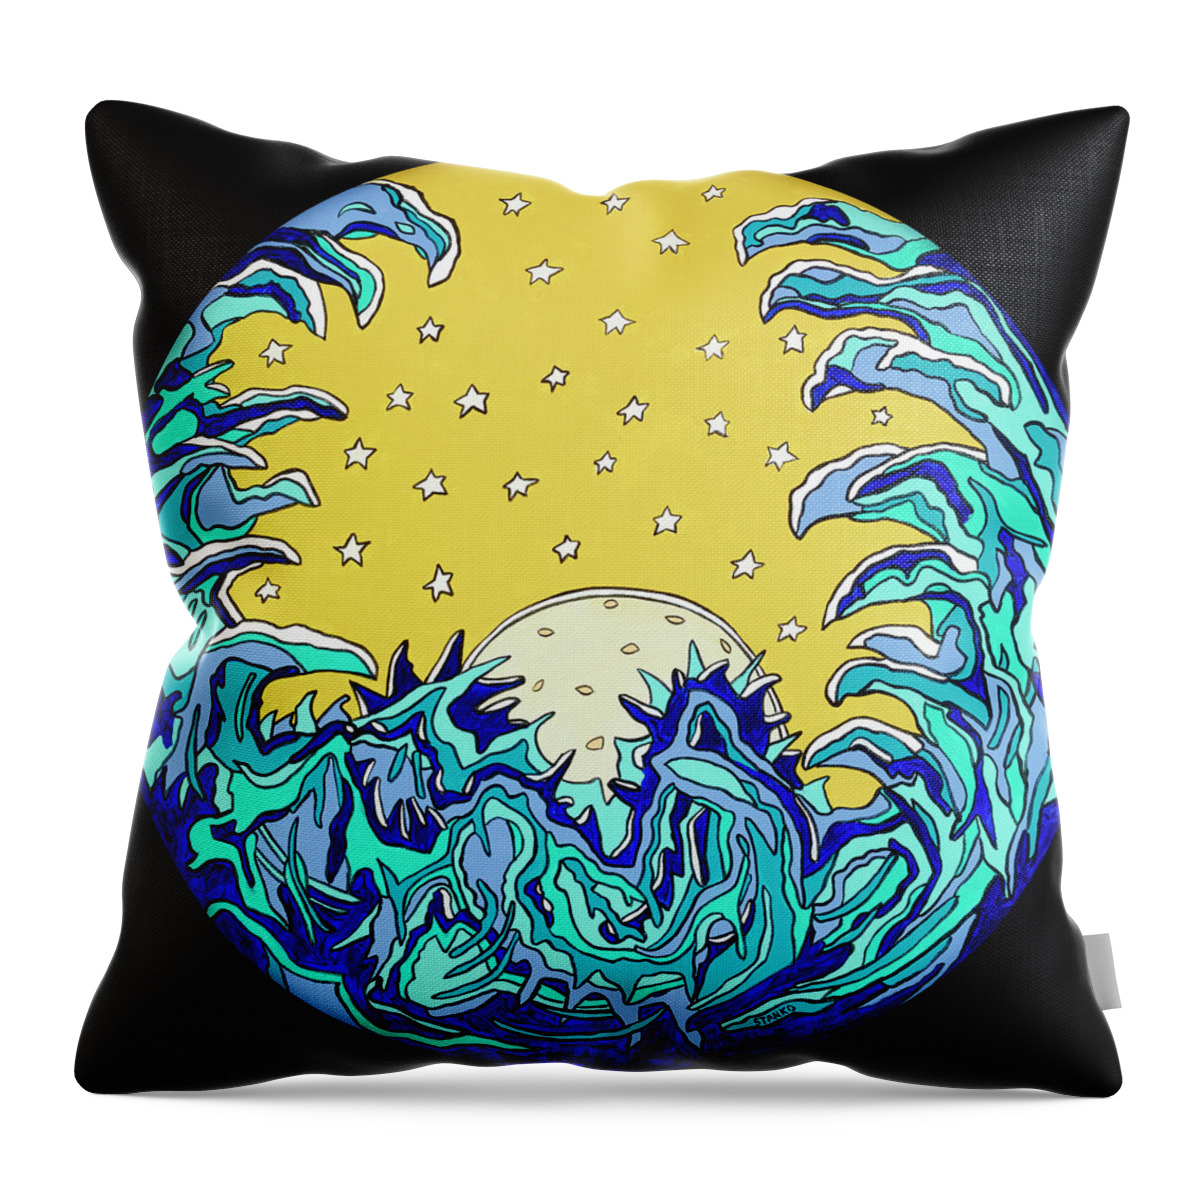 Sun Waves Psychedelic Stars Pop Art Throw Pillow featuring the painting The Waving Sun by Mike Stanko